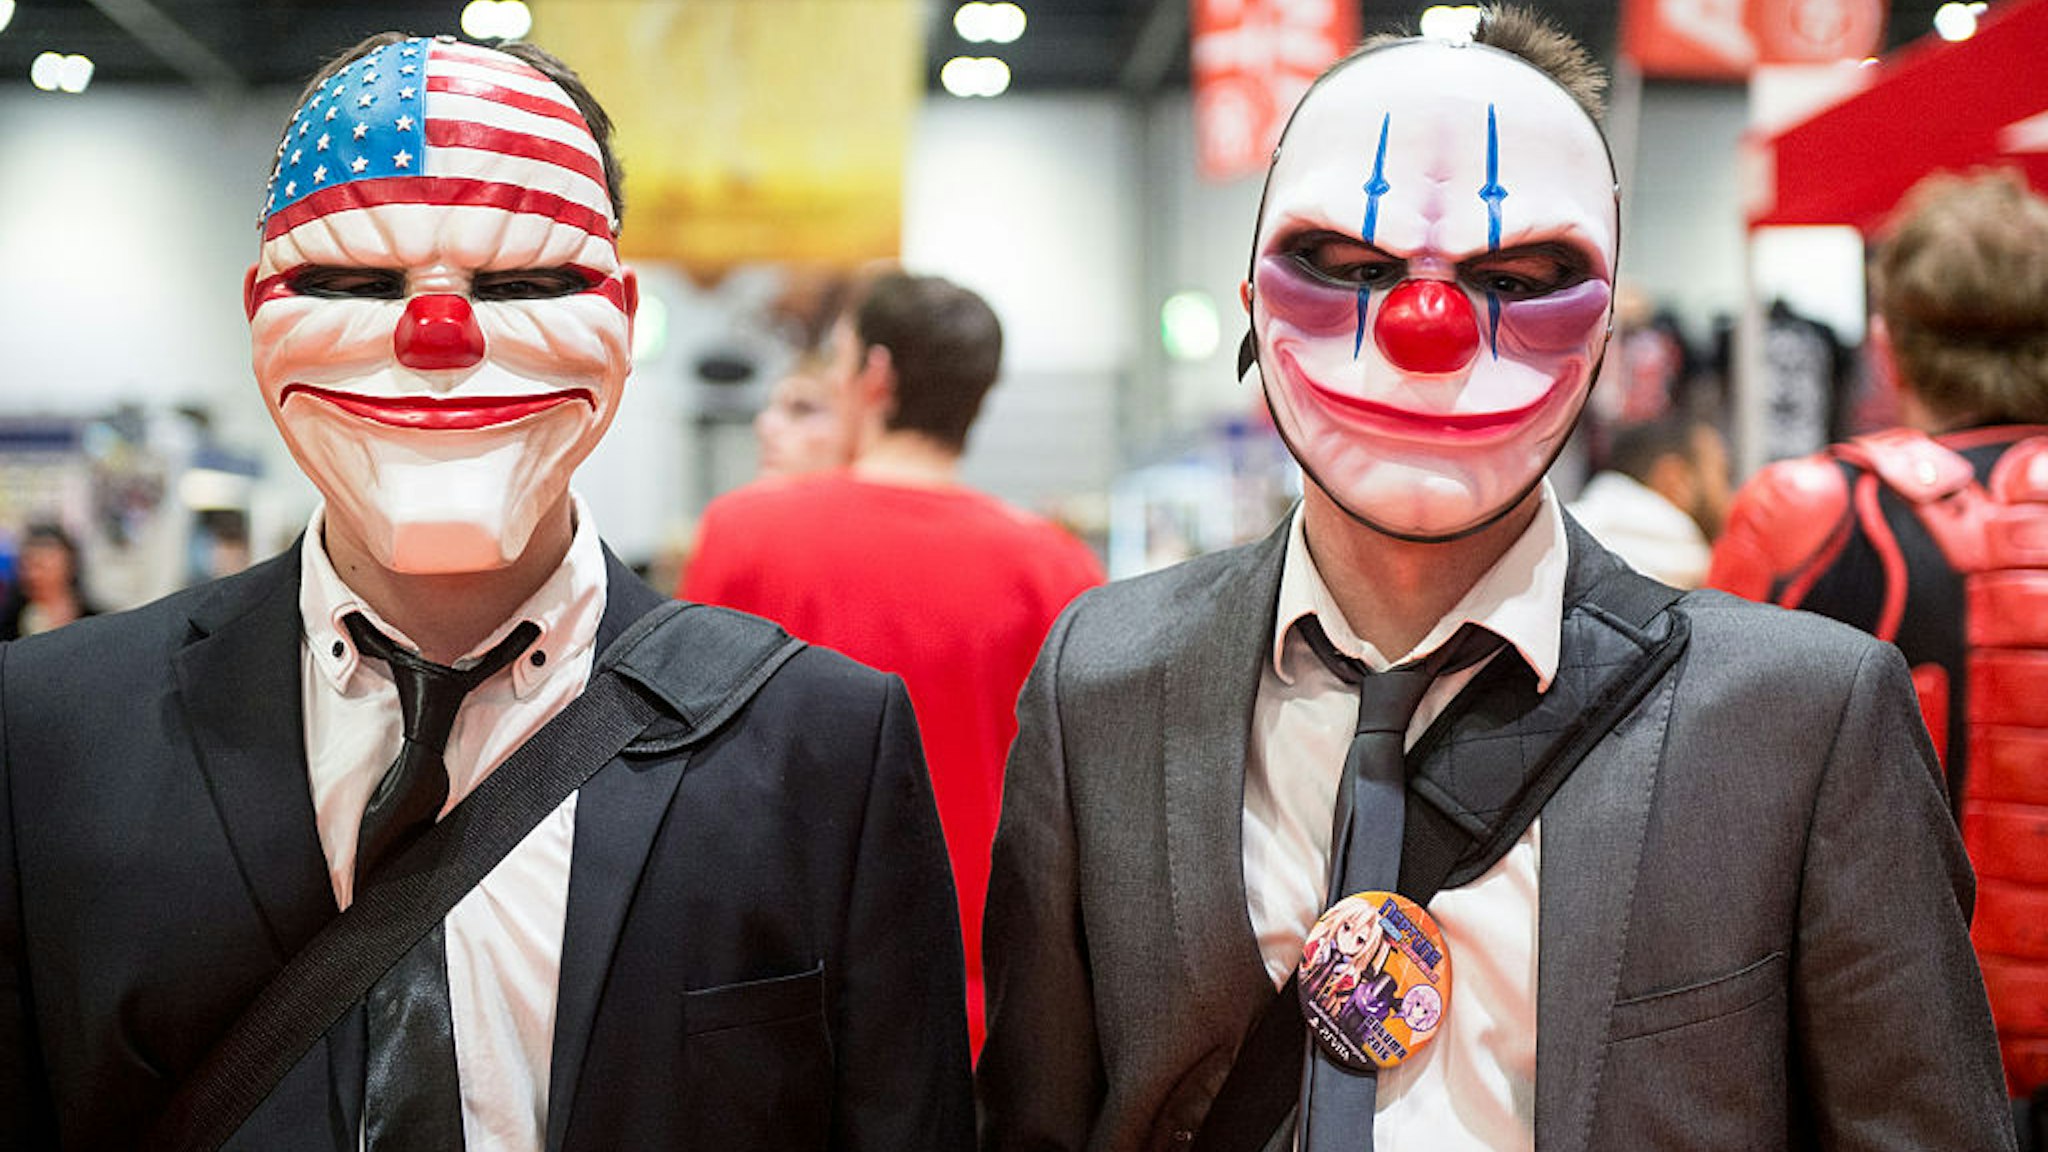 Cosplay enthusiasts in character as Thugs from The Purge on Day 1 of MCM London Comic Con at The London ExCel on May 27, 2016 in London, England.